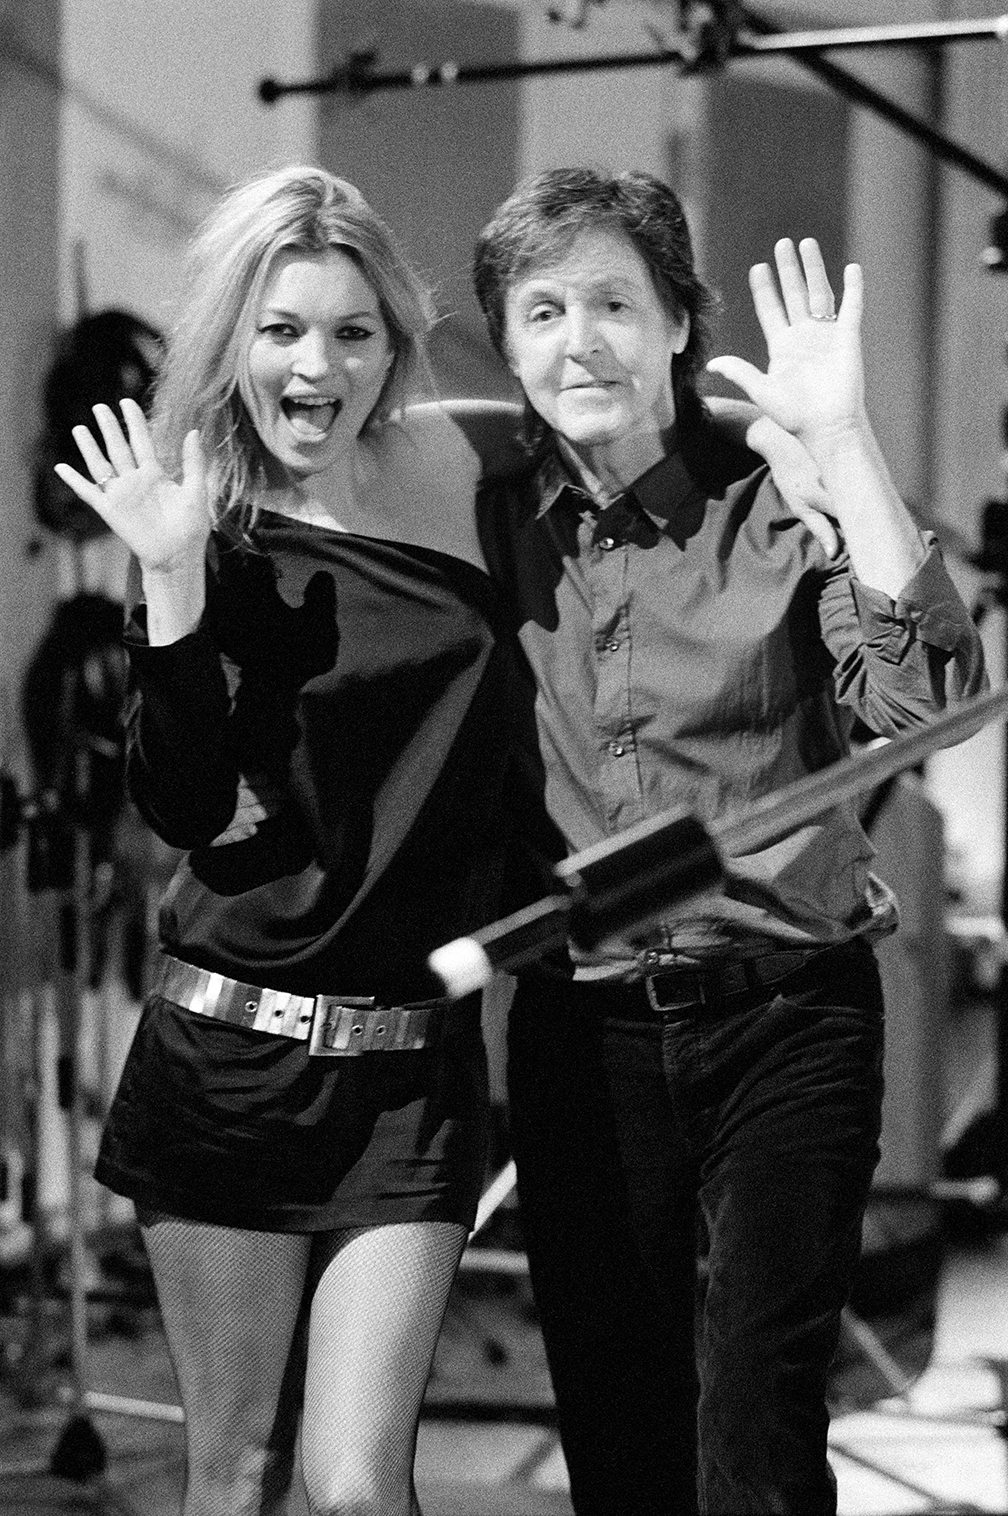 Behind the scenes photos for the Queenie Eye music video by Sir Paul McCartney.